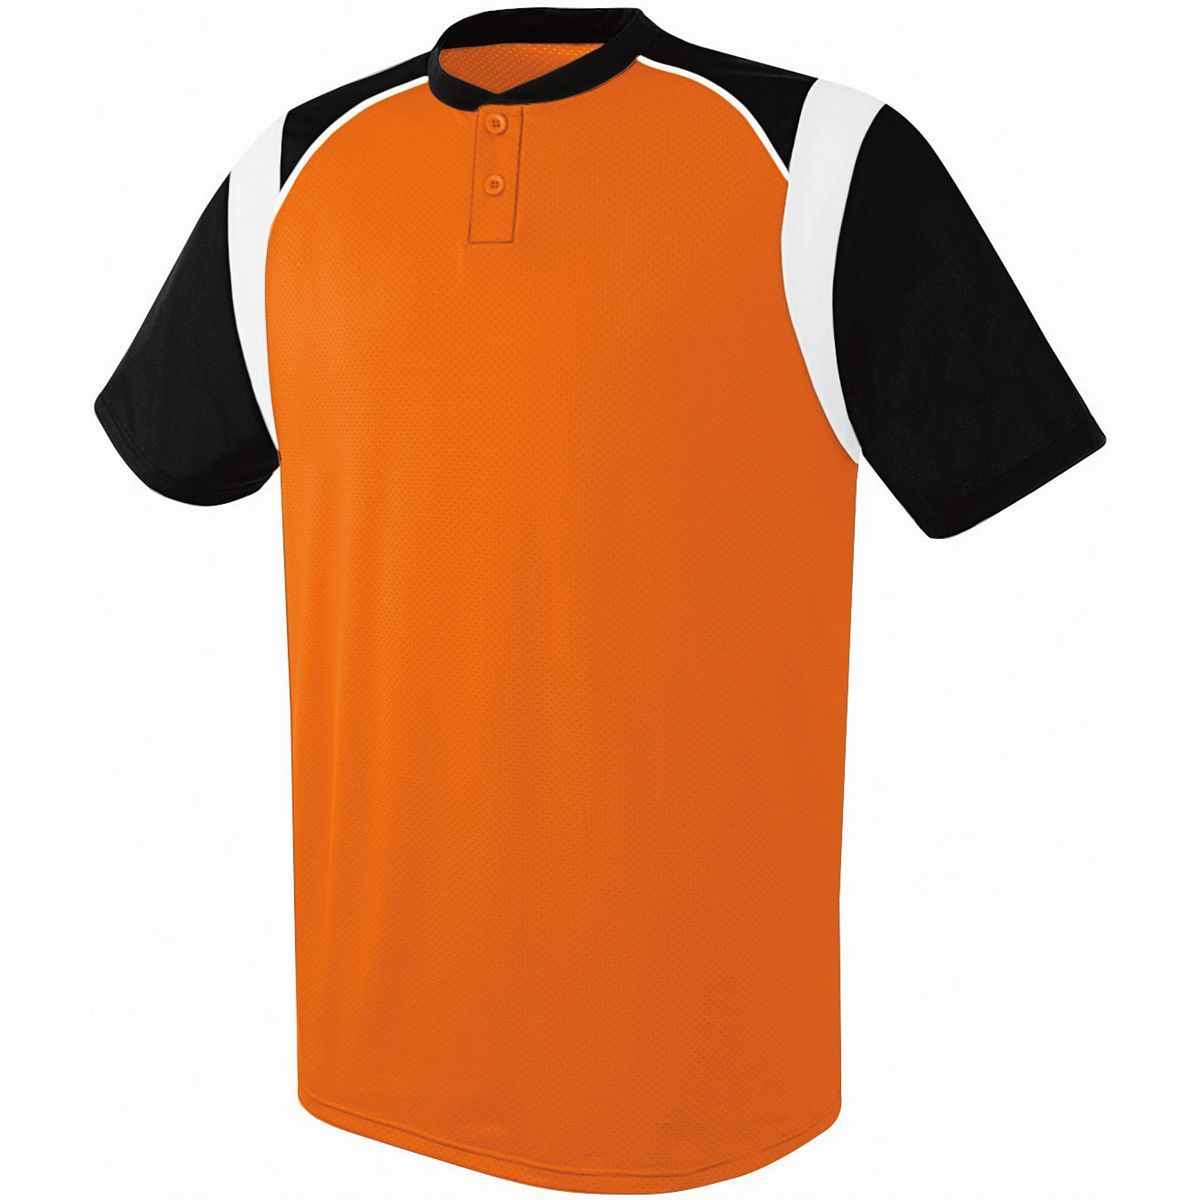 Augusta Sportswear Youth Wildcard Two-Button Jersey in Orange/Black/White  -Part of the Youth, Youth-Jersey, Augusta-Products, Baseball, Shirts, All-Sports, All-Sports-1 product lines at KanaleyCreations.com